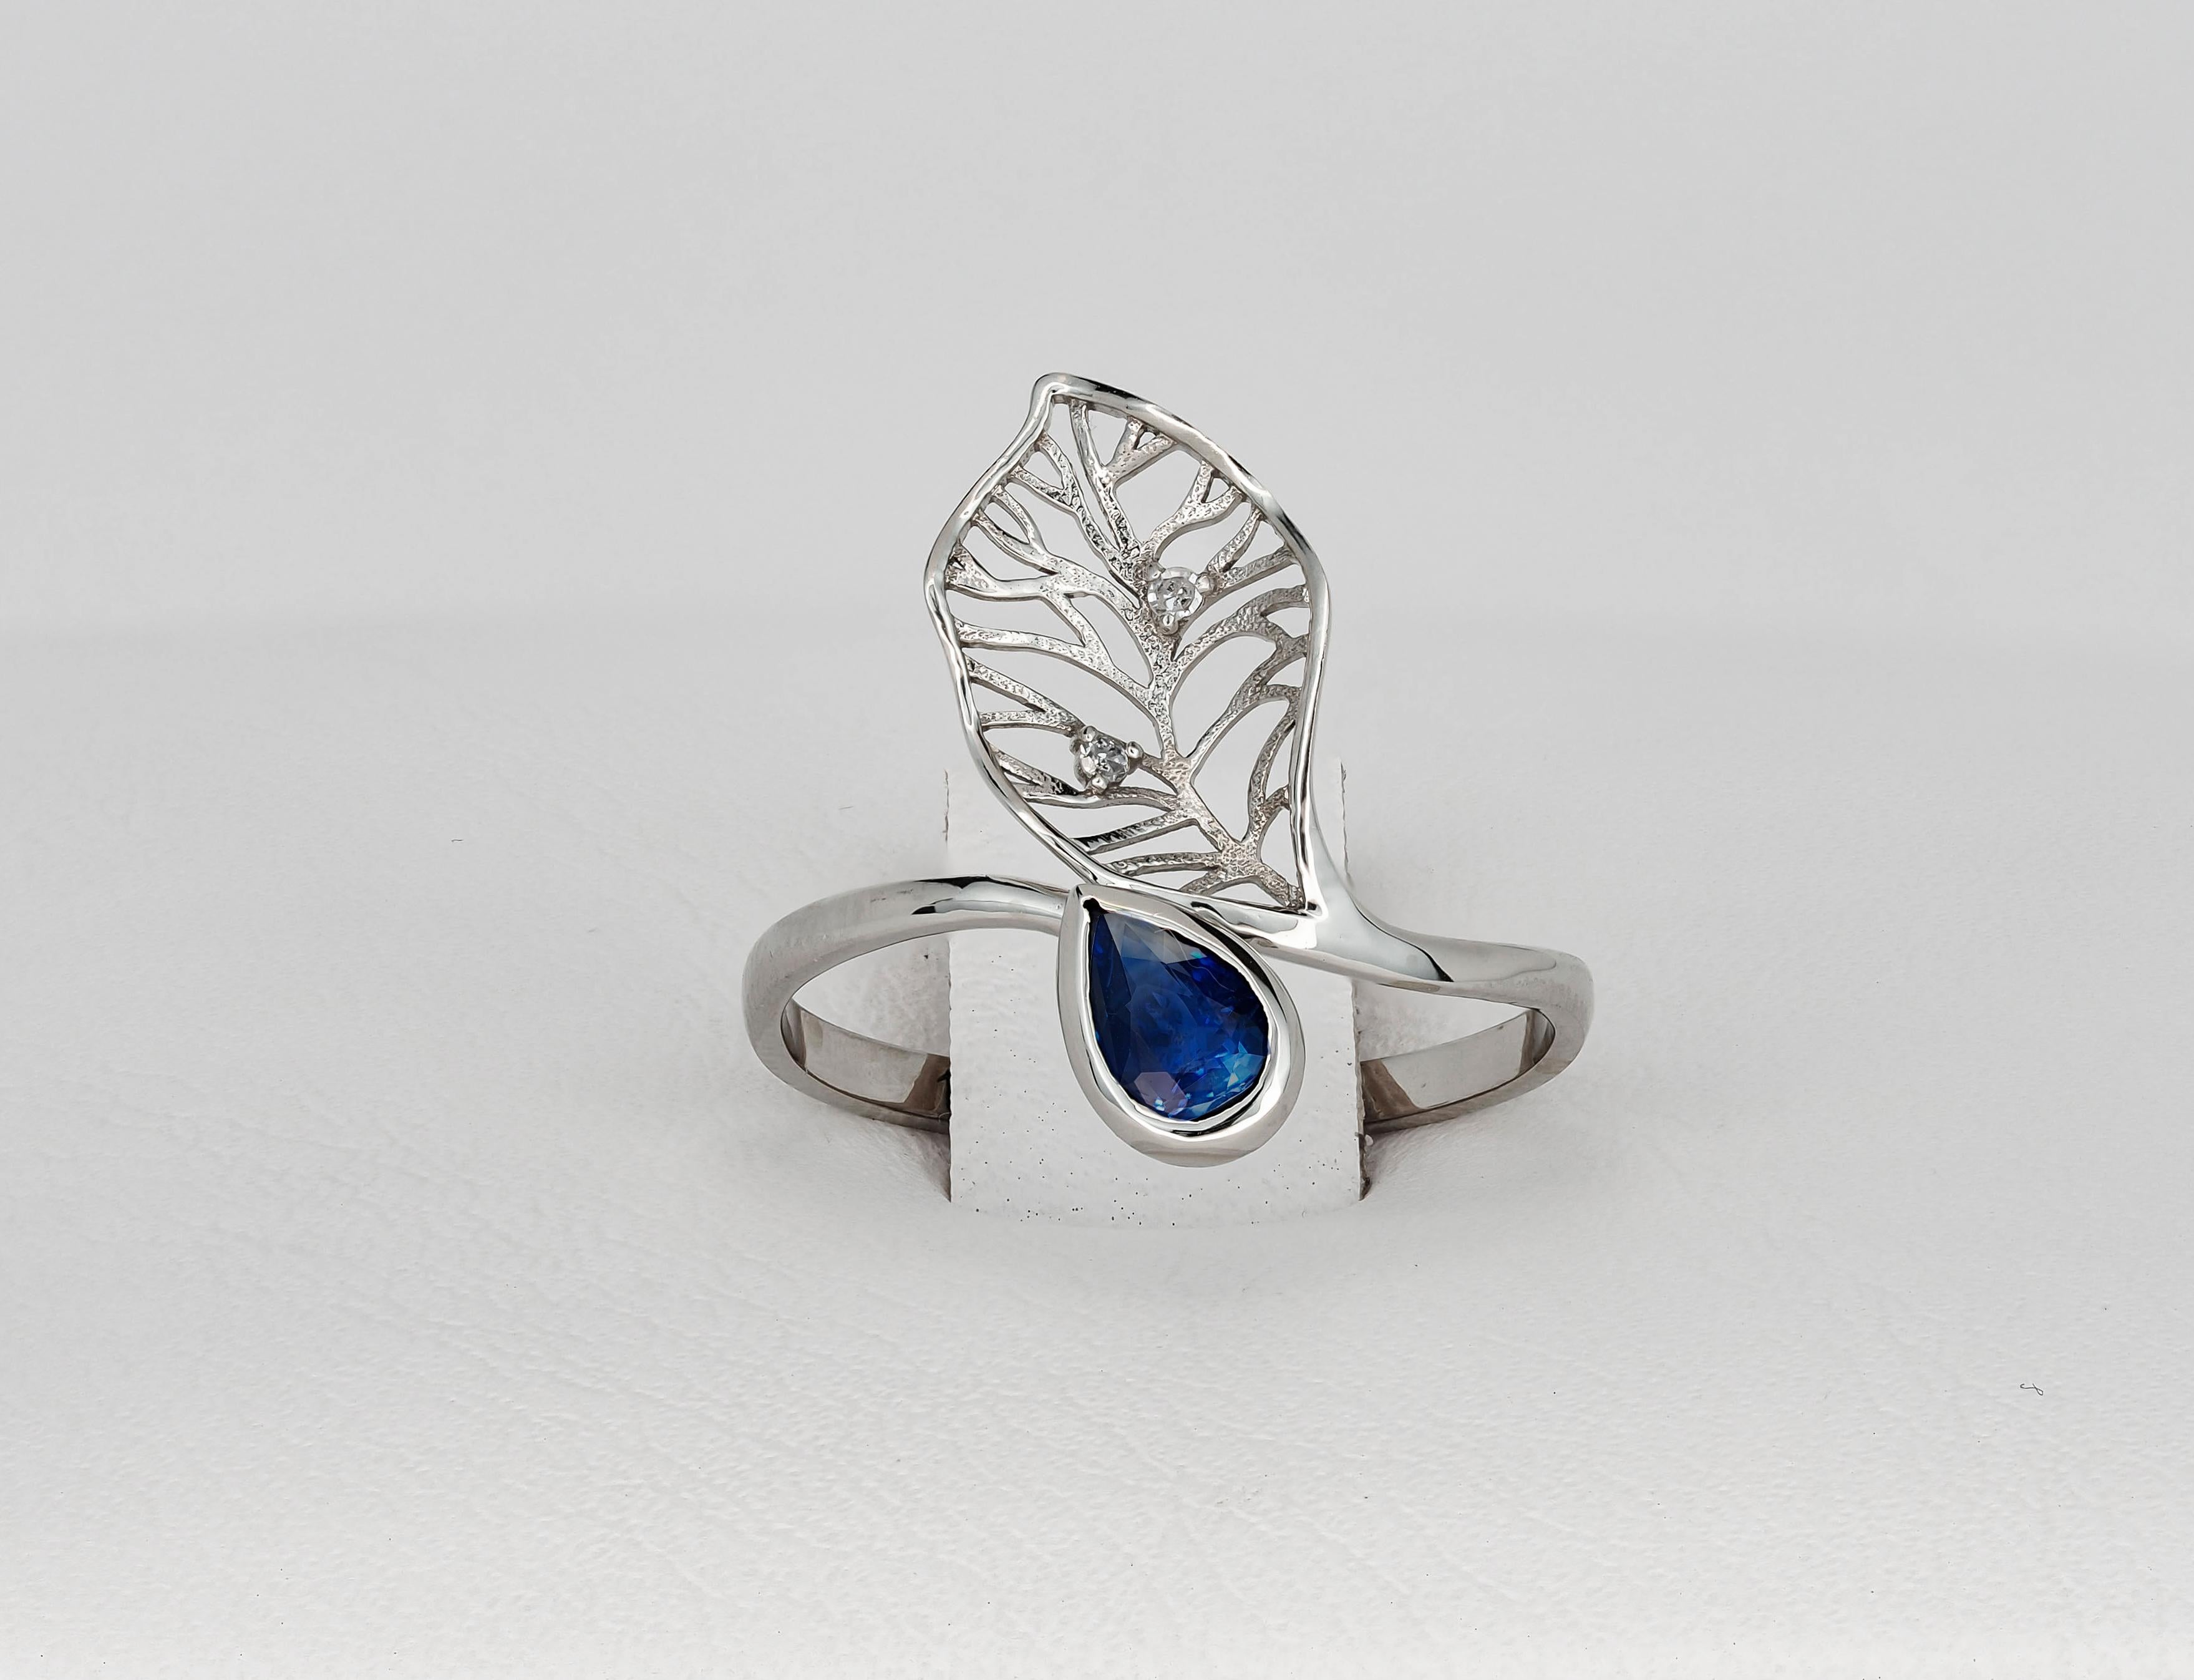 14 Karat Gold Ring with Sapphire and Diamonds. Floral Design Ring with Sapphire For Sale 1